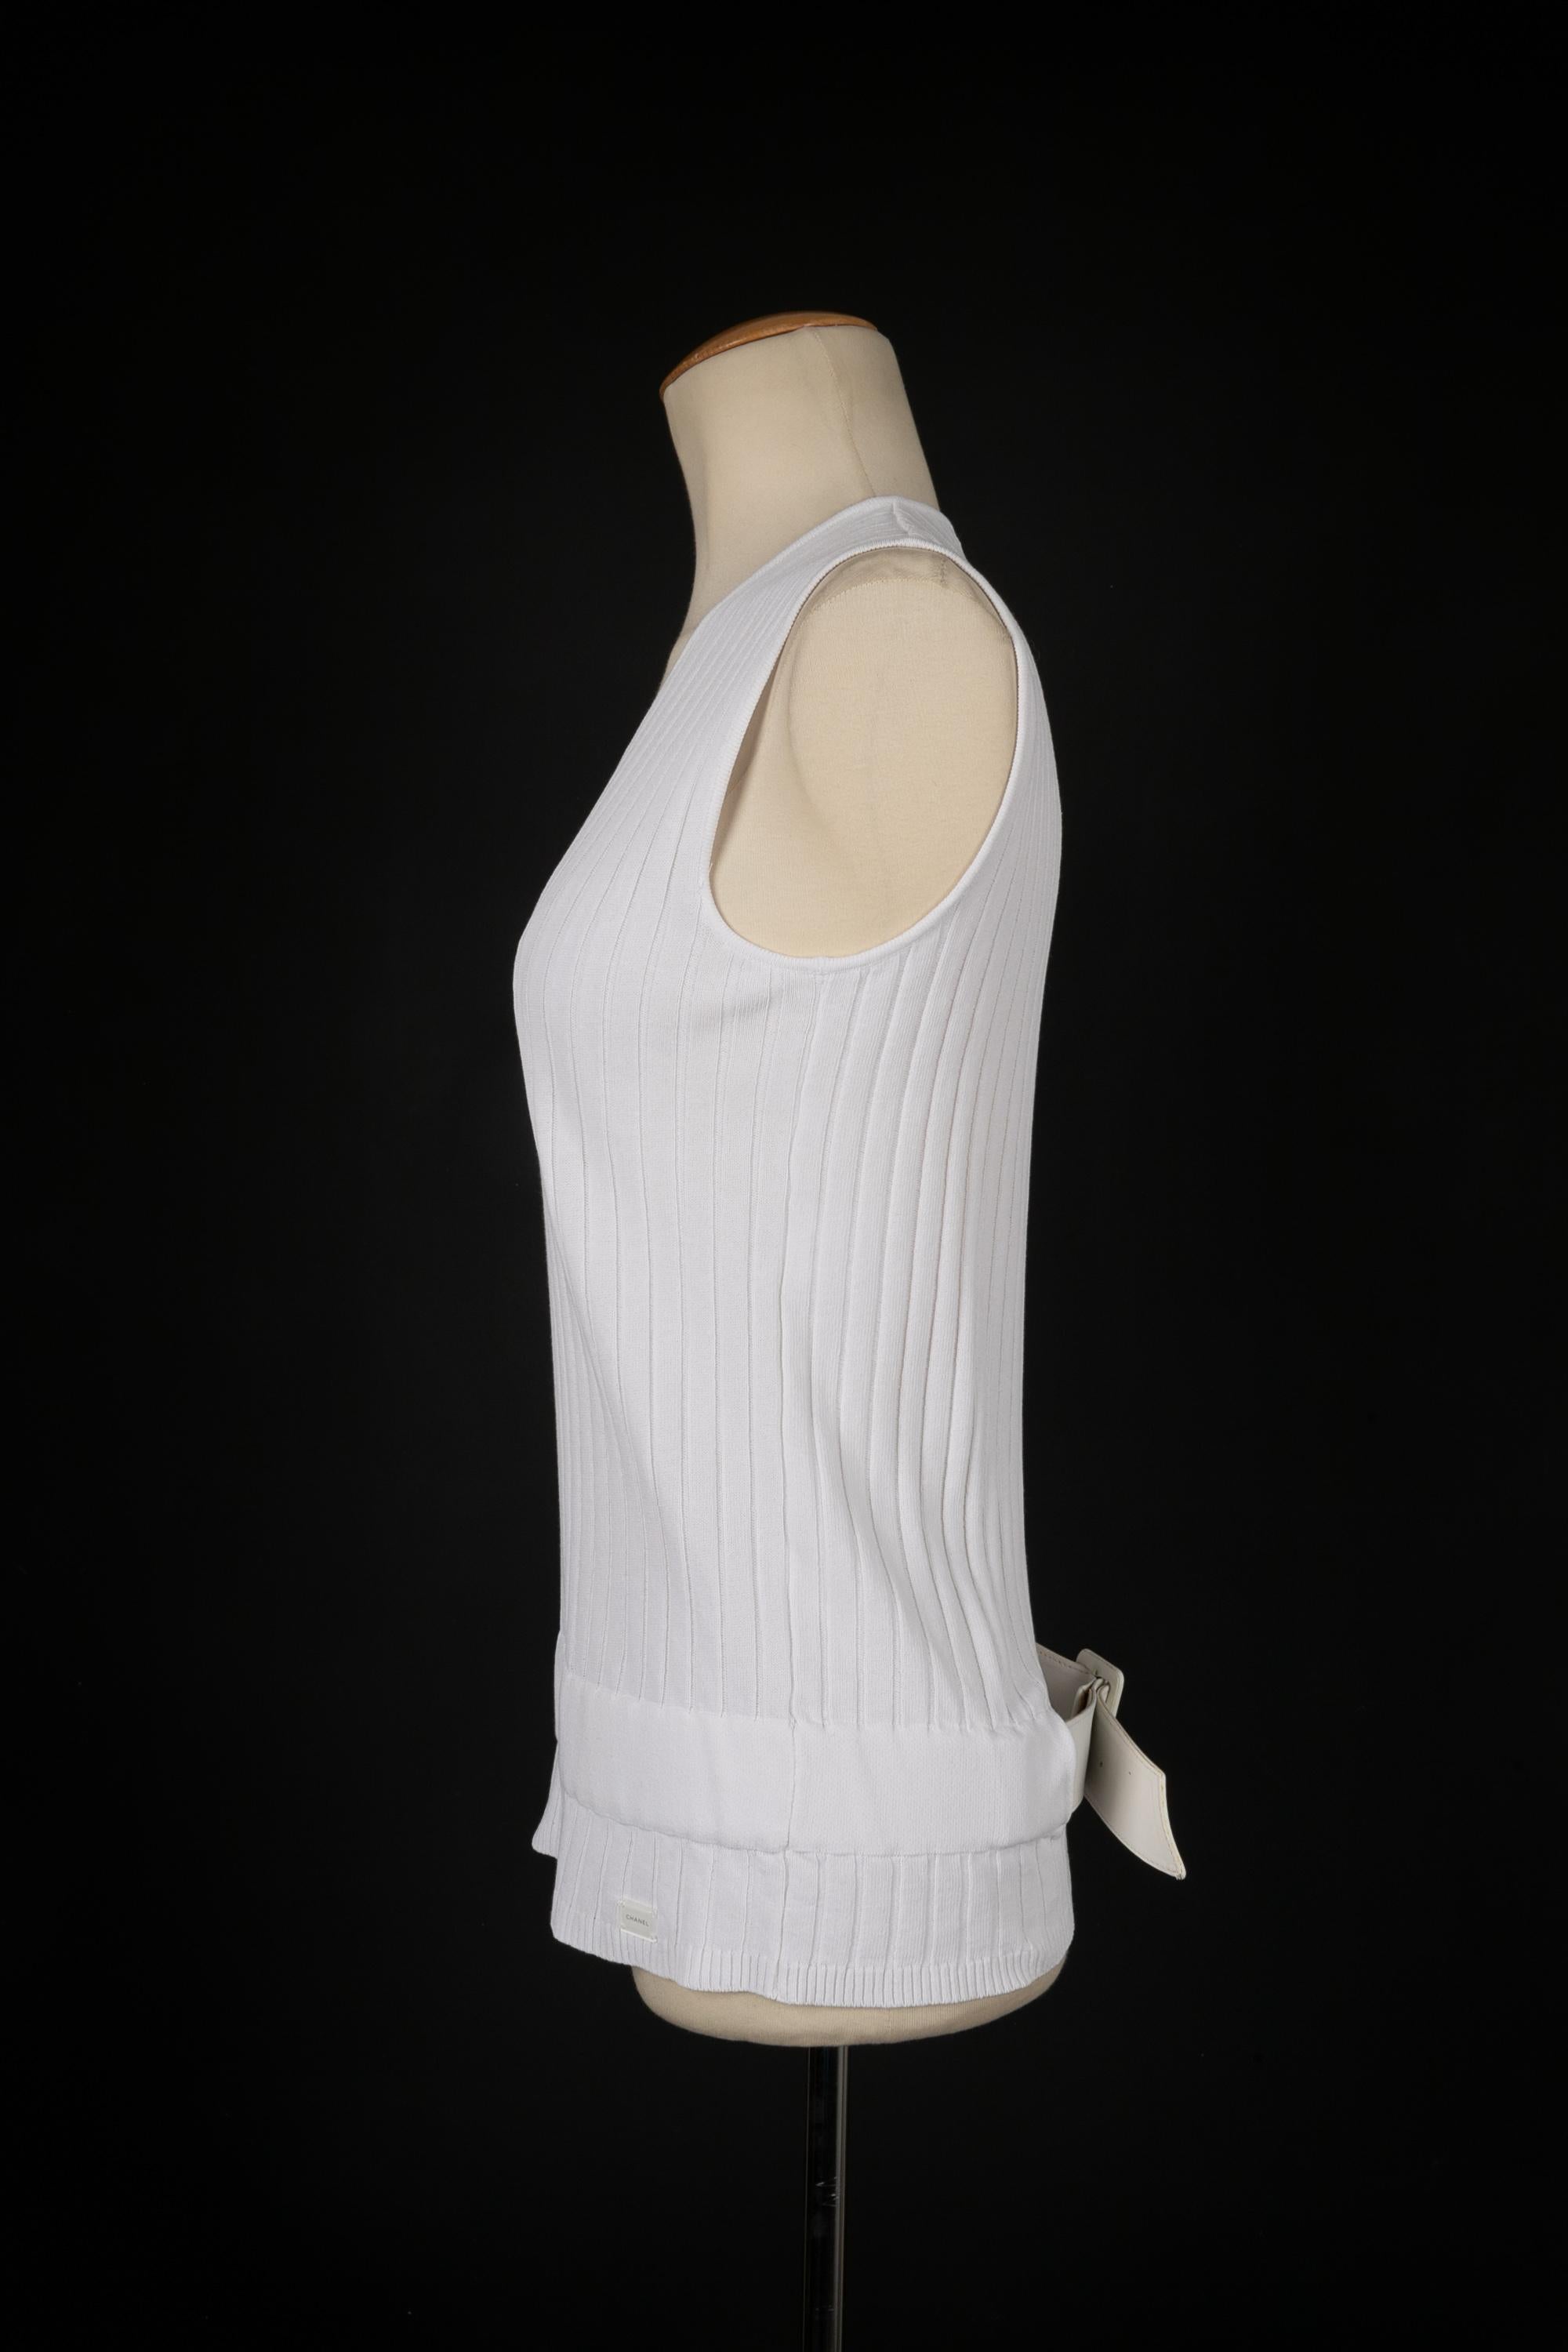 CHANEL - (Made in France) White cotton top with a leather belt to emphasize the hips. 44FR size. 2002 Spring-Summer Collection.

Condition:
Very good condition

Dimensions:
Chest: 40 cm - Length: 60 cm

FH194